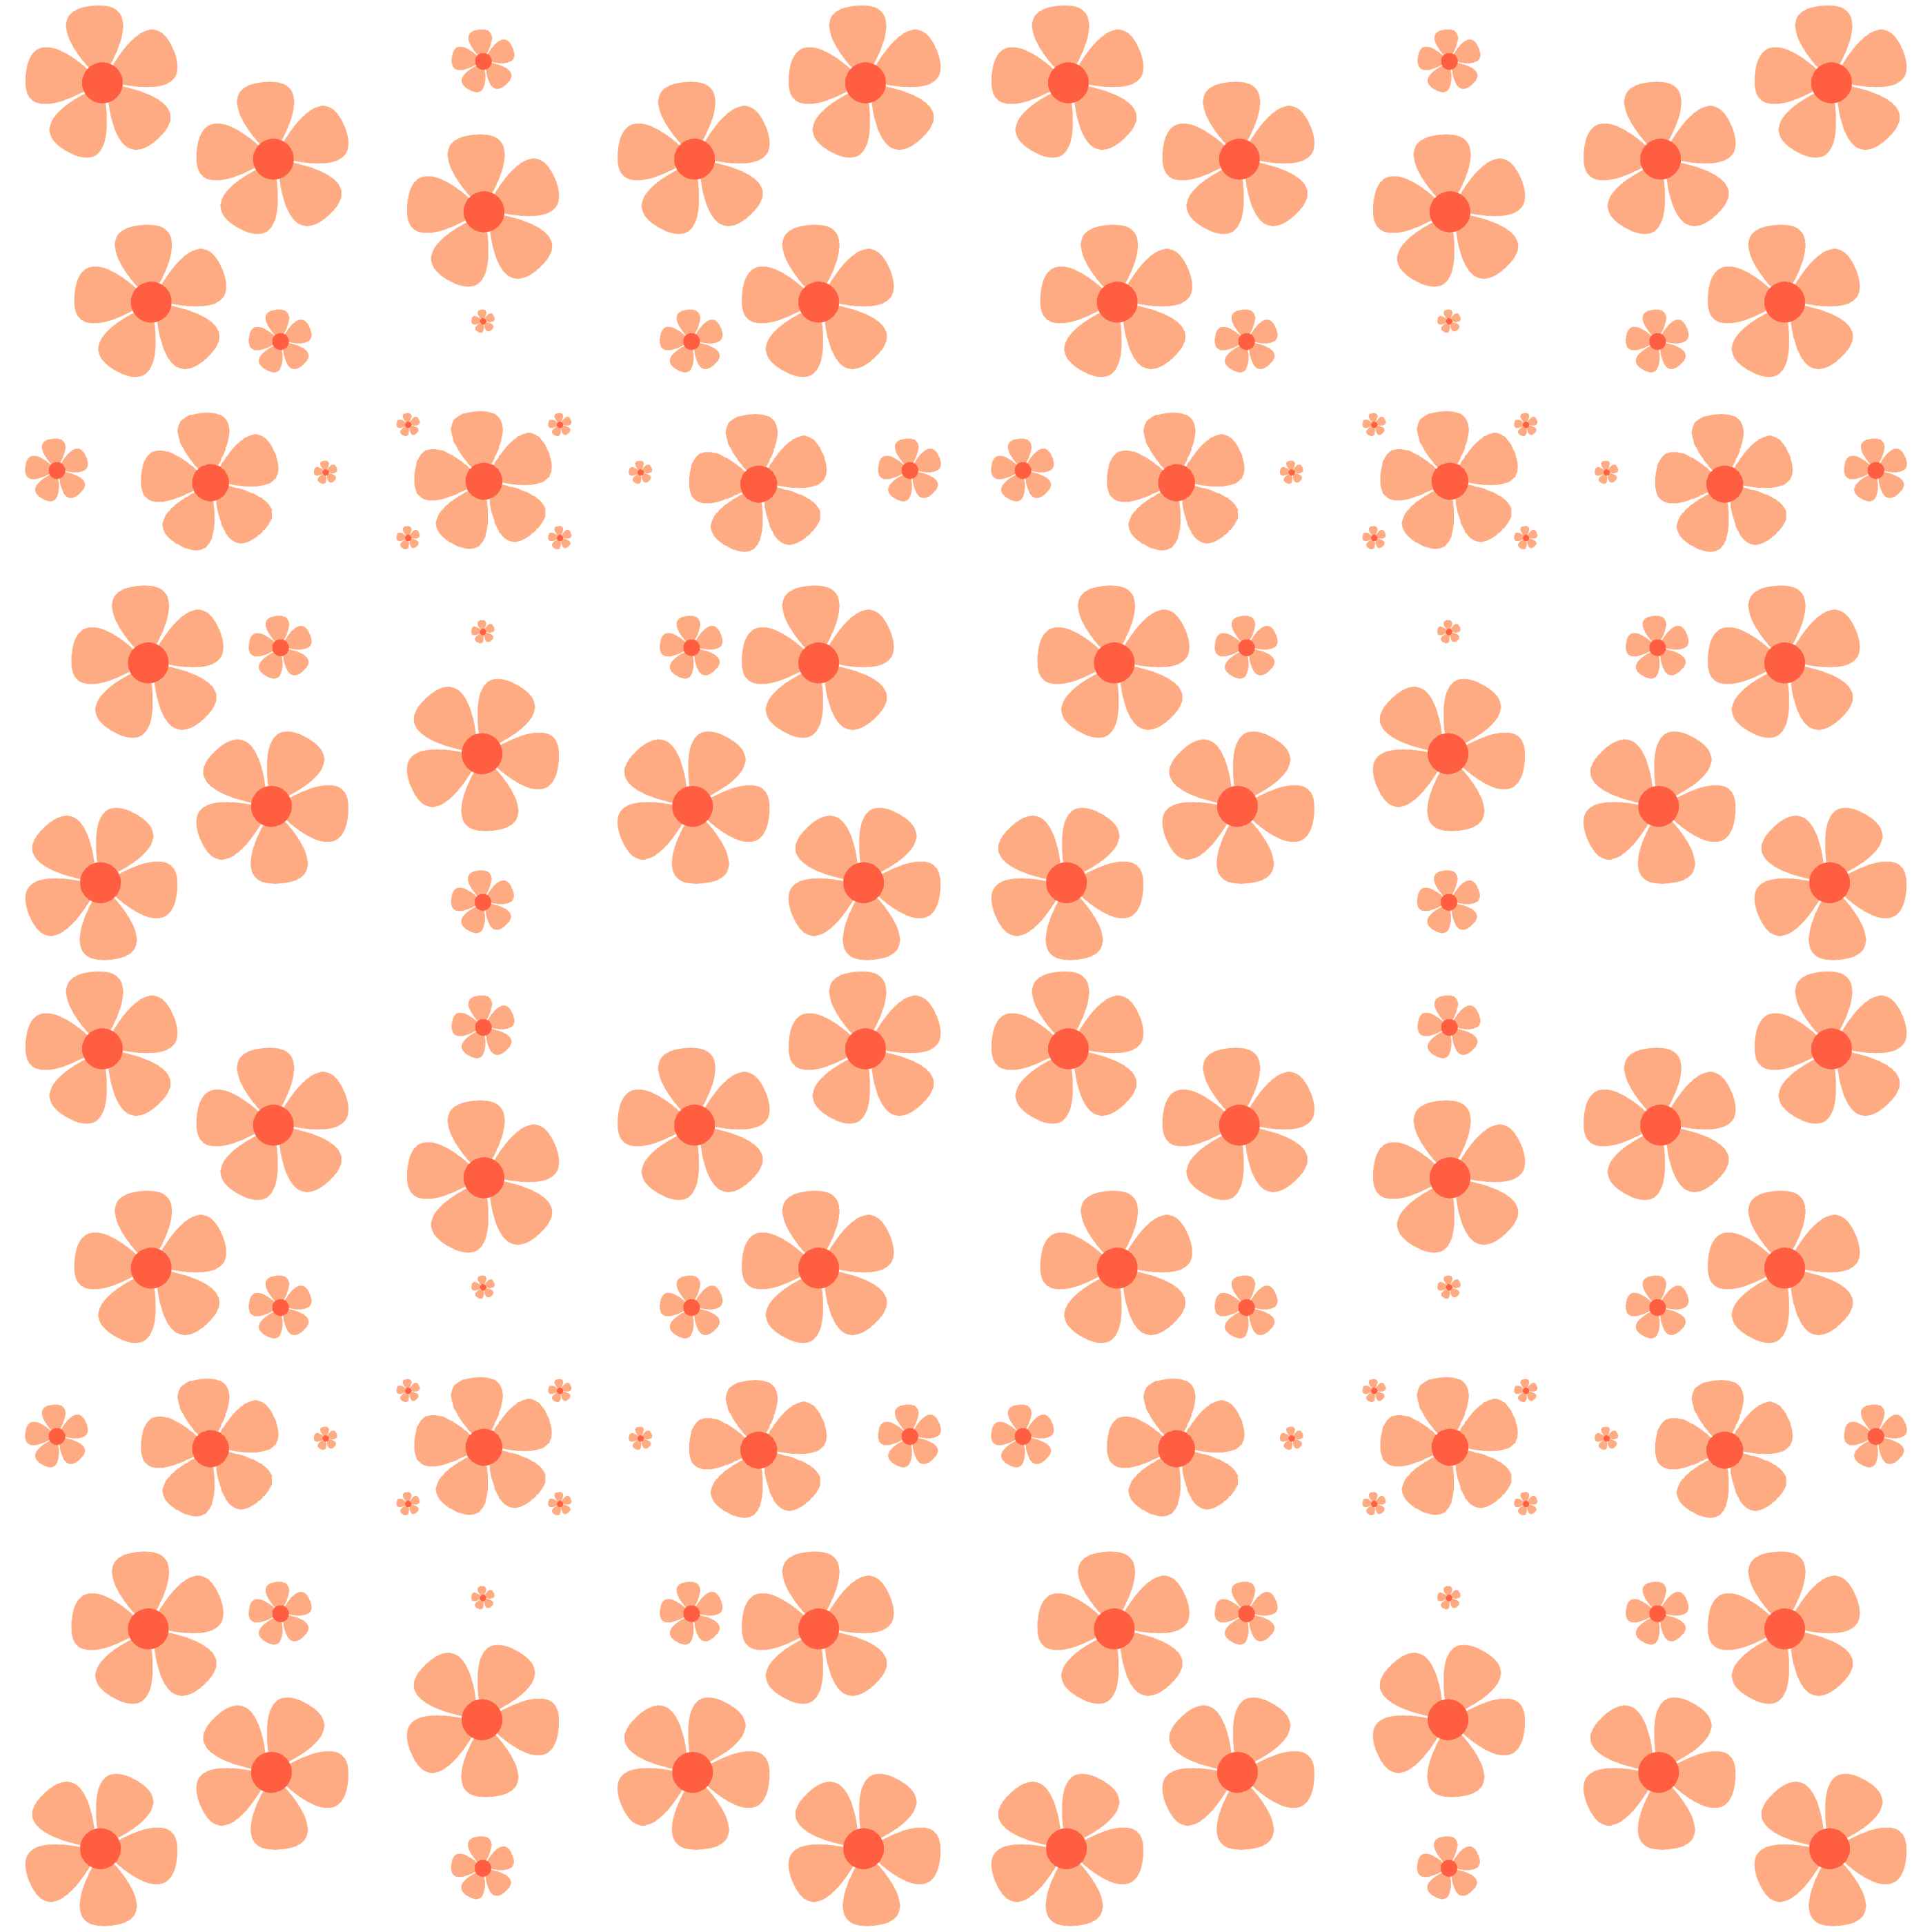 Pattern of orange flowers on a white background.